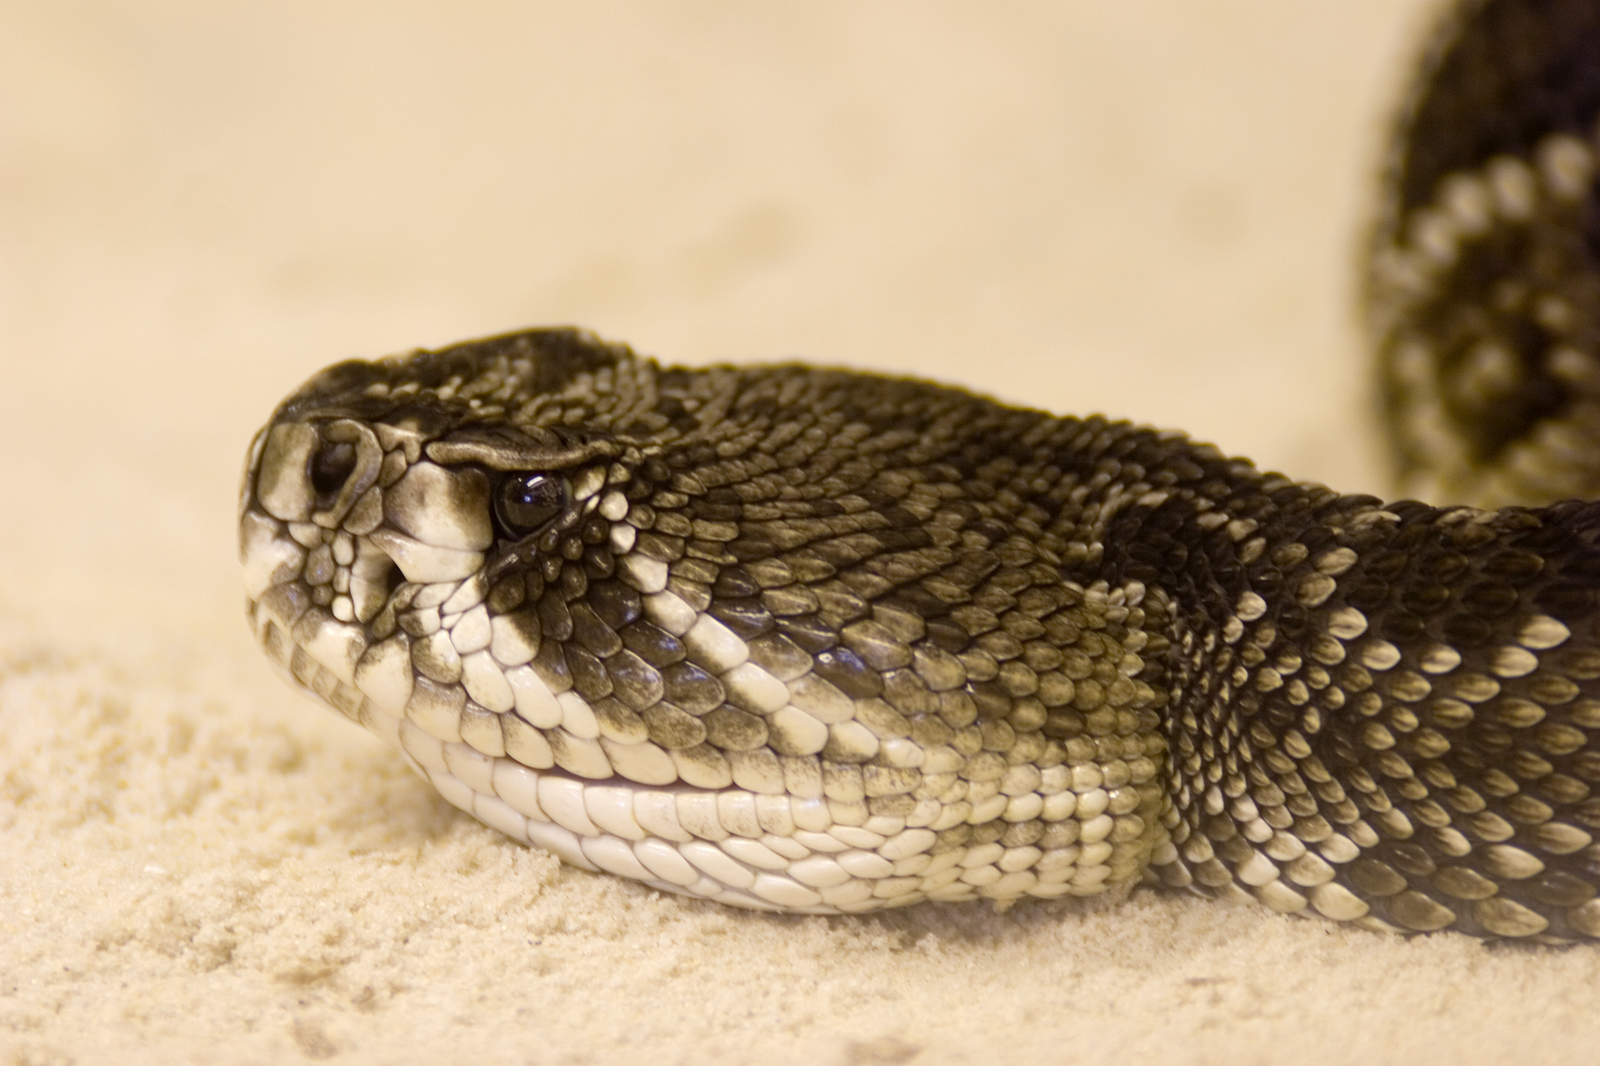 Are Rattlesnakes Pit Vipers?